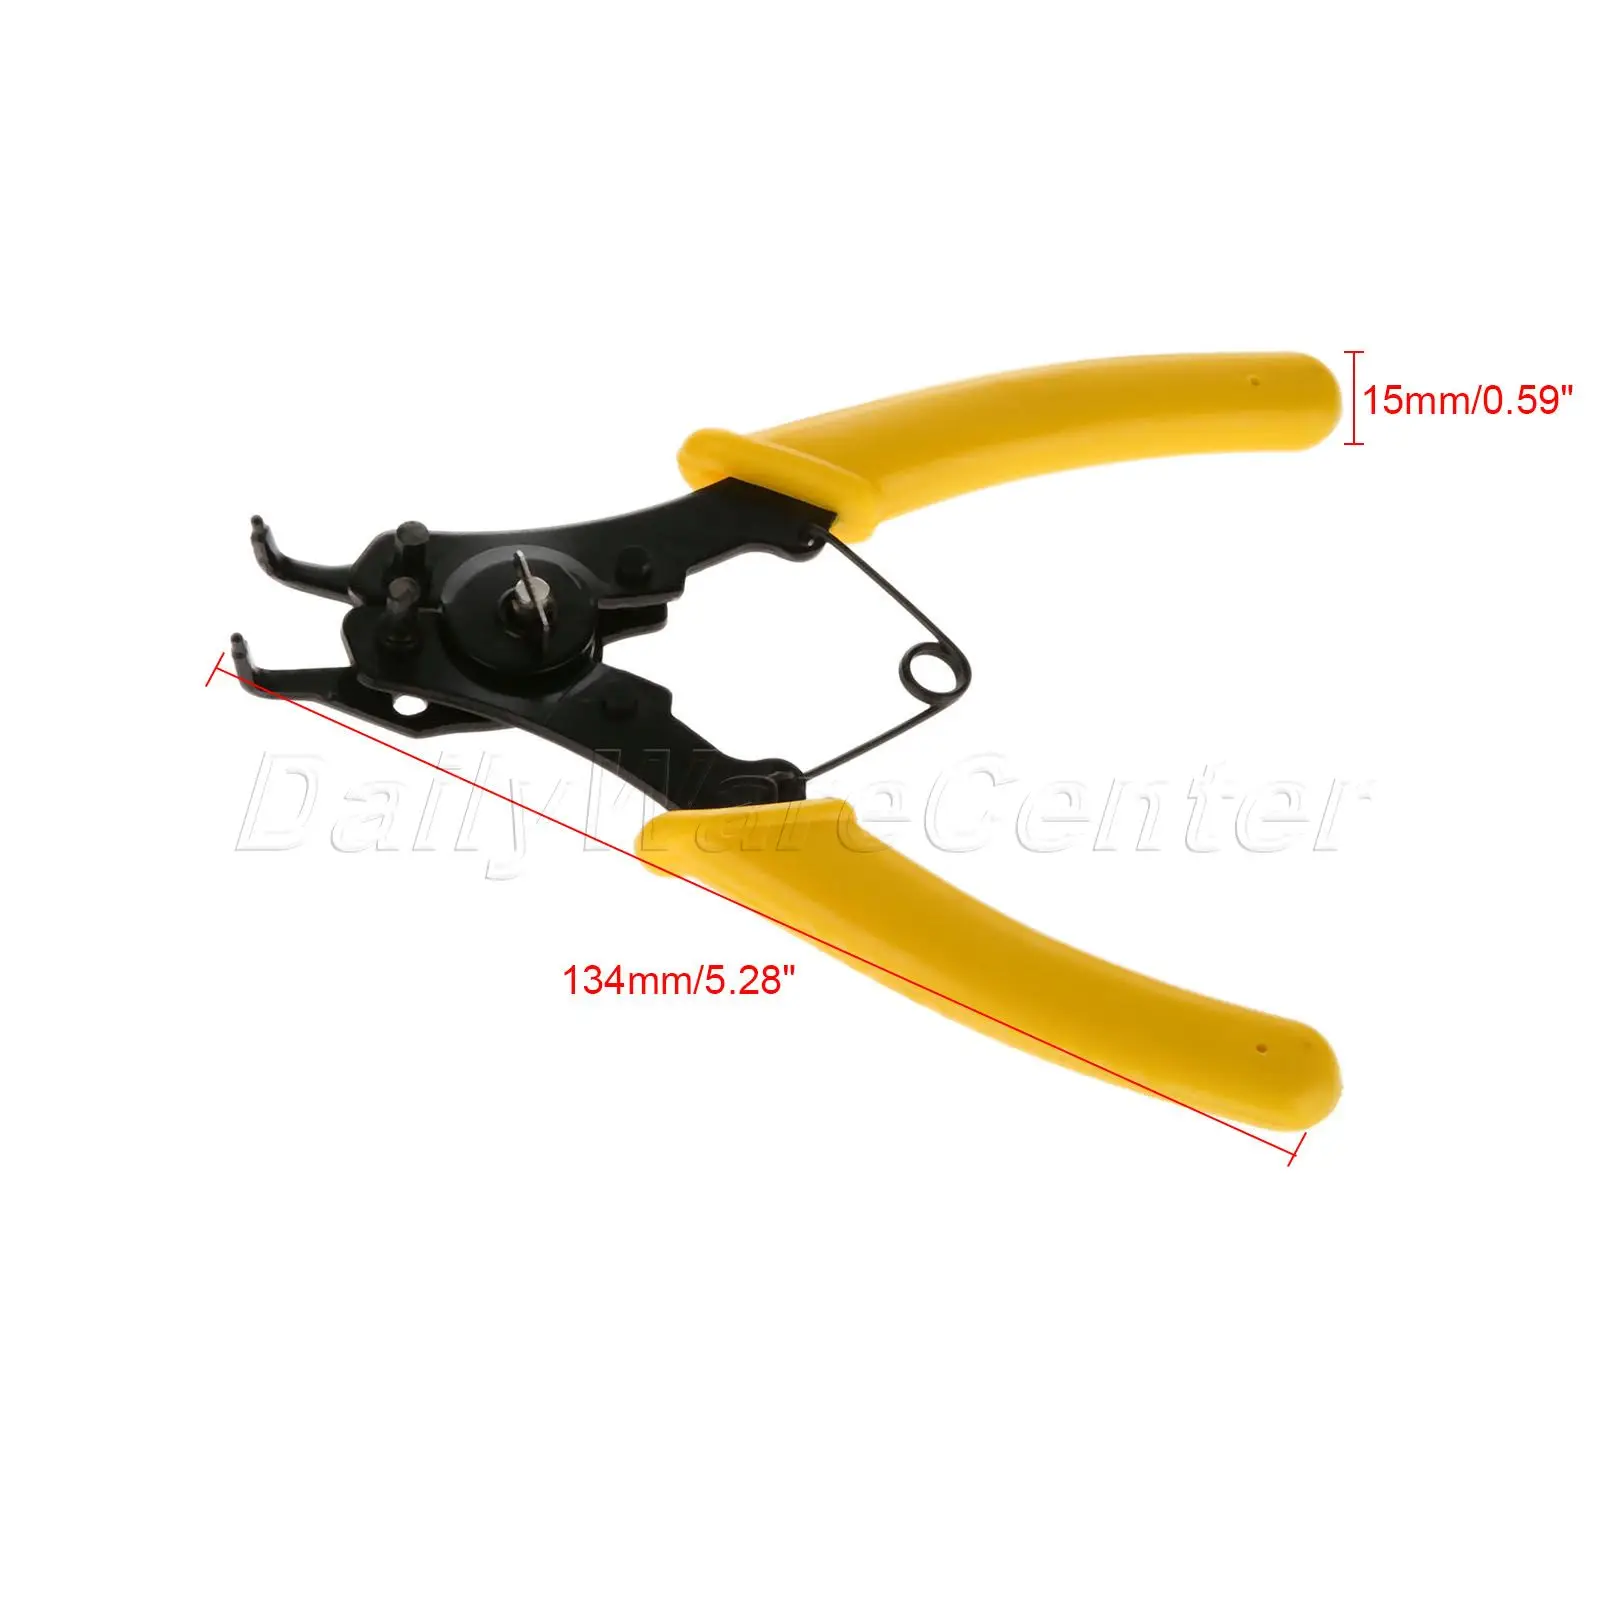 High-Q 4 In 1 Multifunction Snap Ring Pliers Universal Circlip Combination Retaining Clip Plier Hand Tool Set W/4 Tip Assemblies